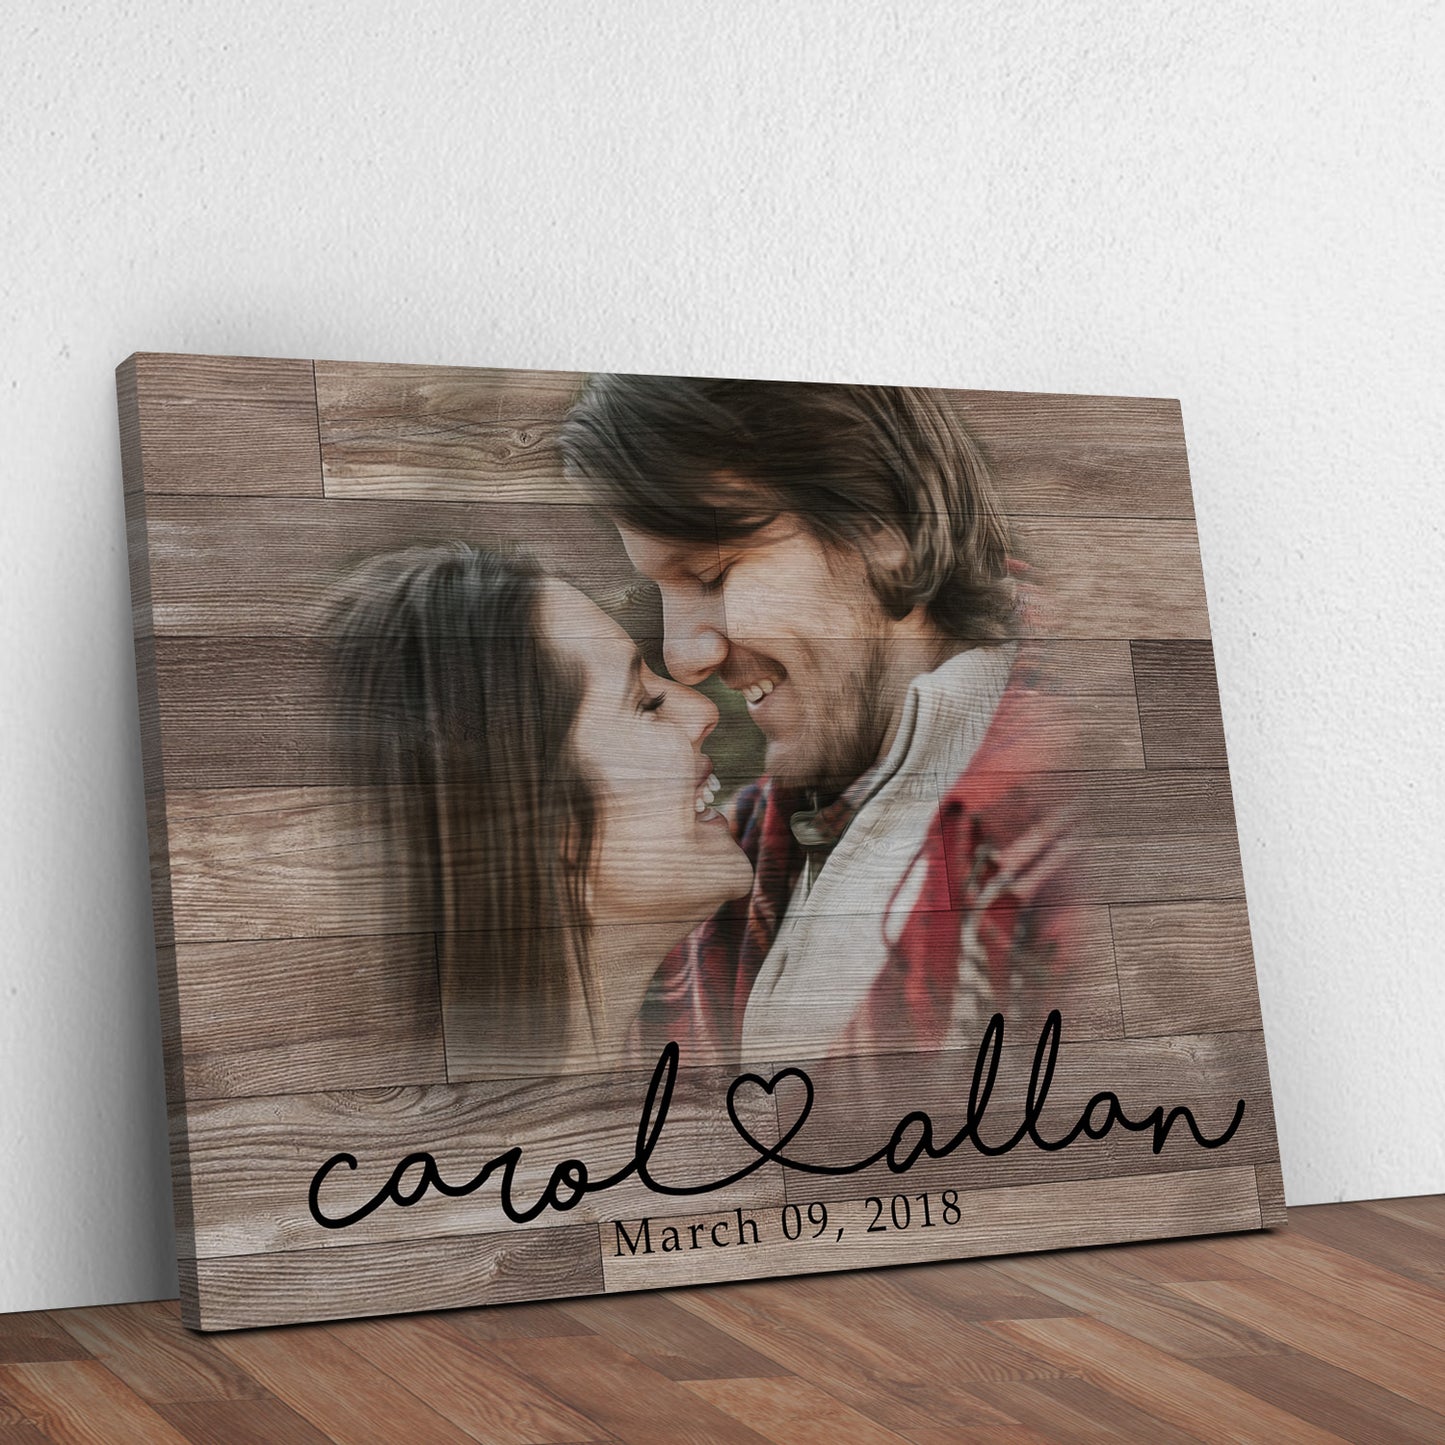 Couple Portrait Sign - Image by Tailored Canvases